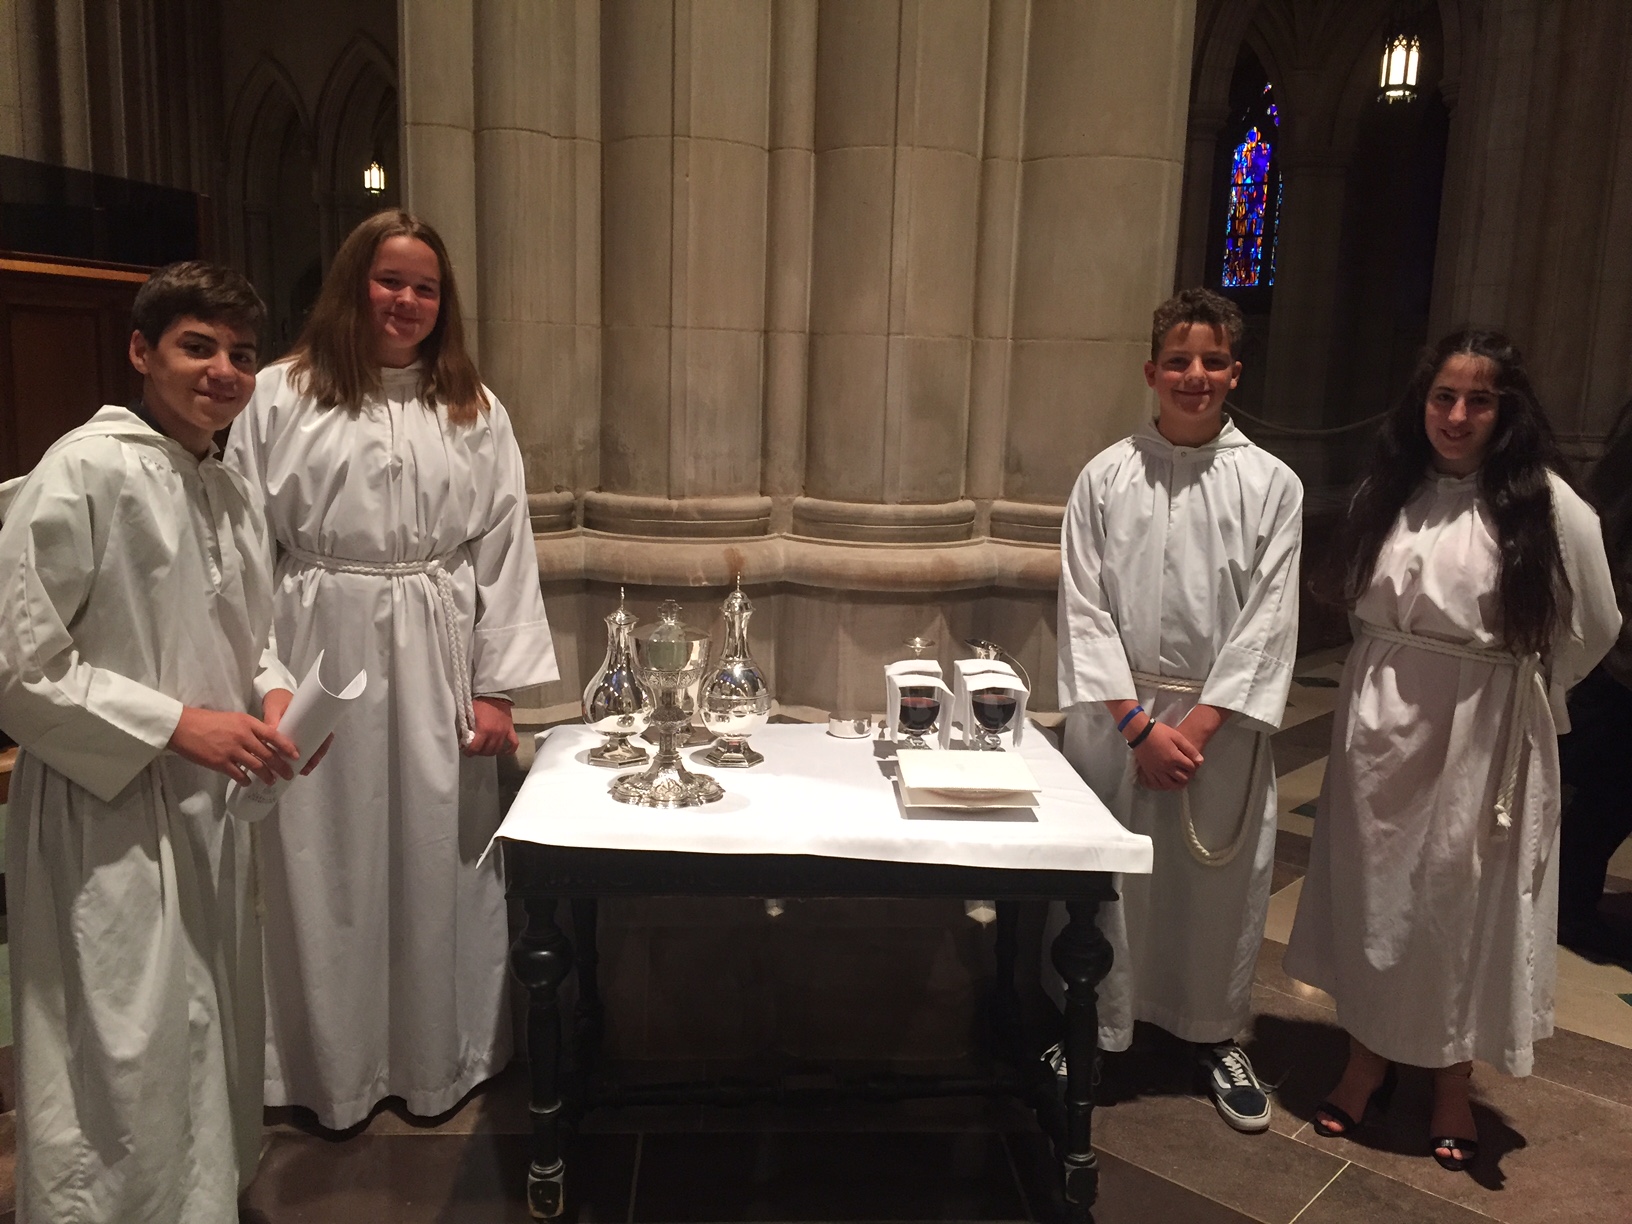 Youth from St. James, Upper Montclair at the National Acolyte Festival. PHOTO COURTESY ST. JAMES, UPPER MONTCLAIR